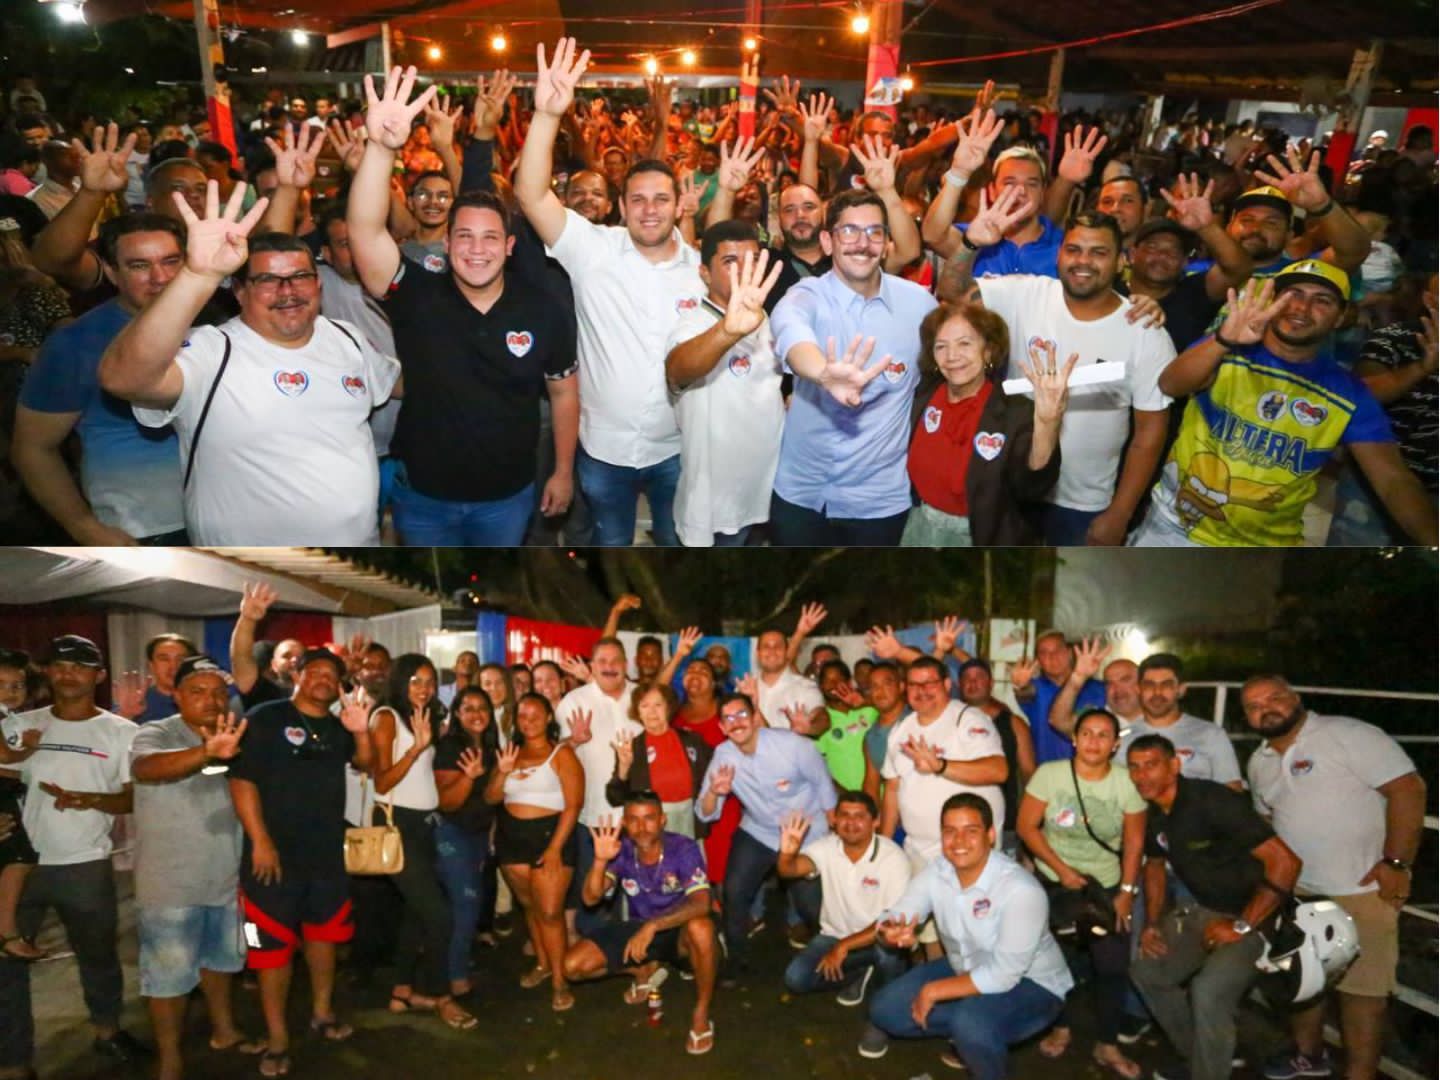 Heriberto Medeiros and Heriberto Filho show strength in a big political act in the southern zone of Recife.